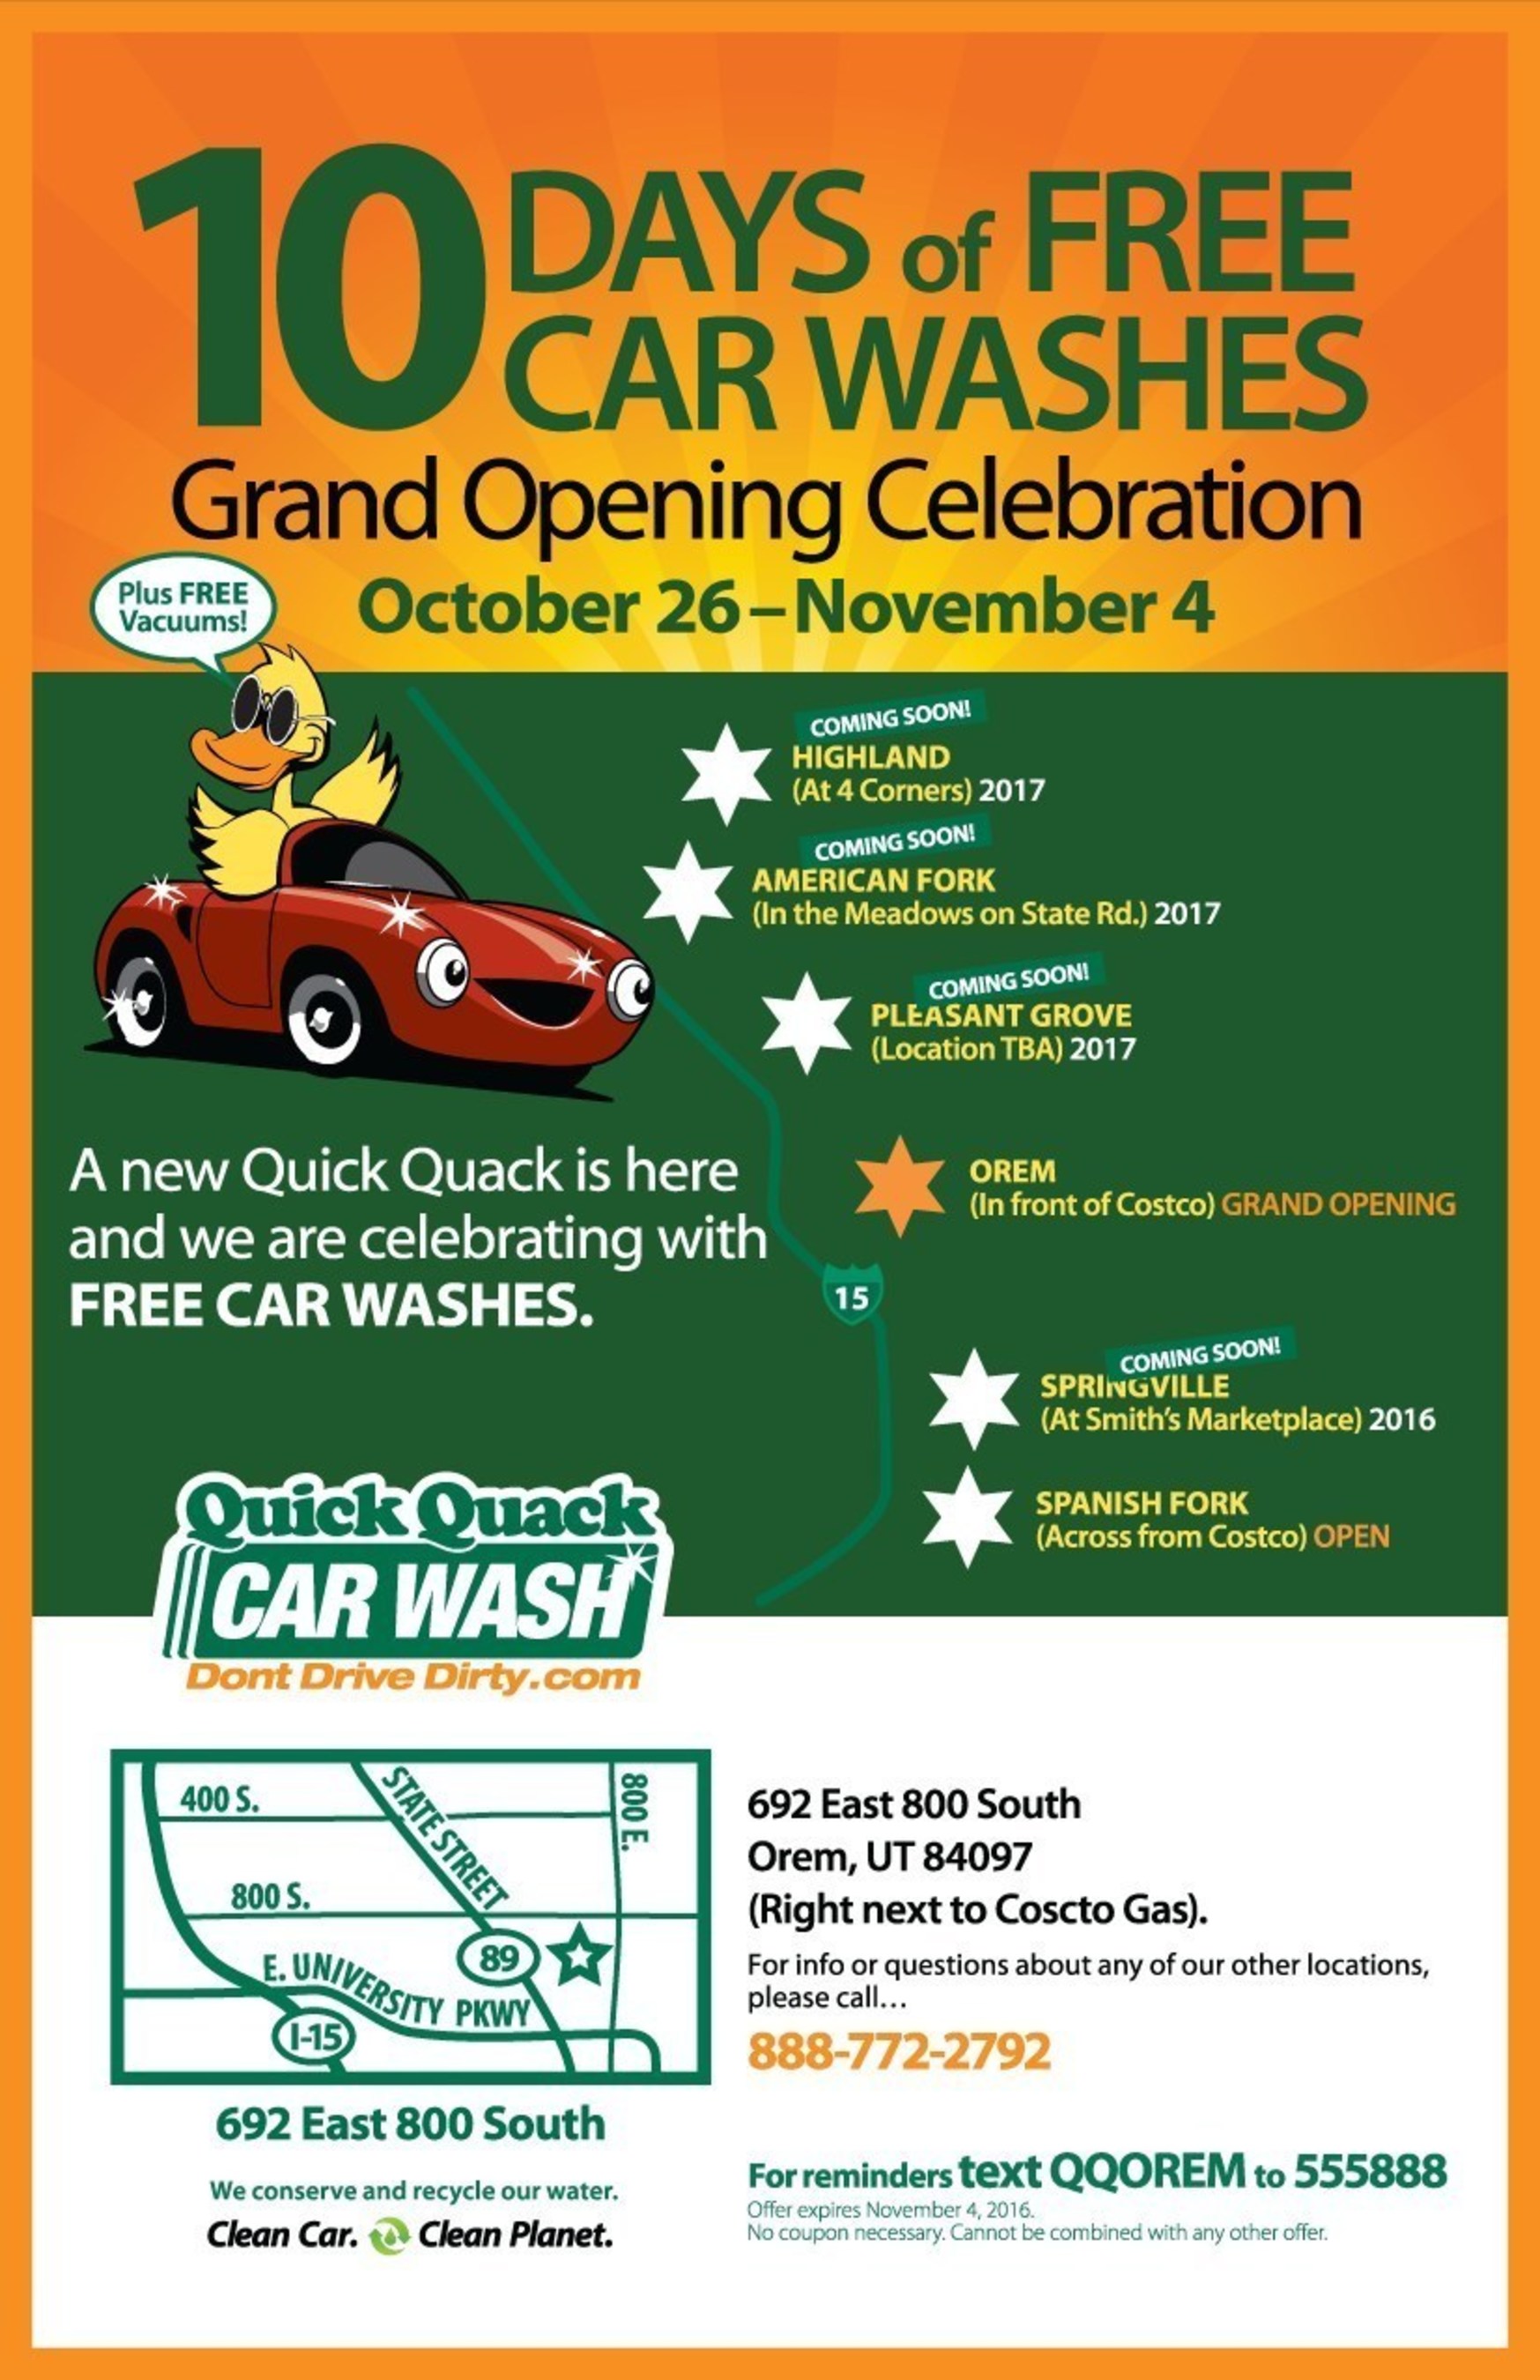 10 days of free car washes at Orem grand opening of Quick Quack Car Wash